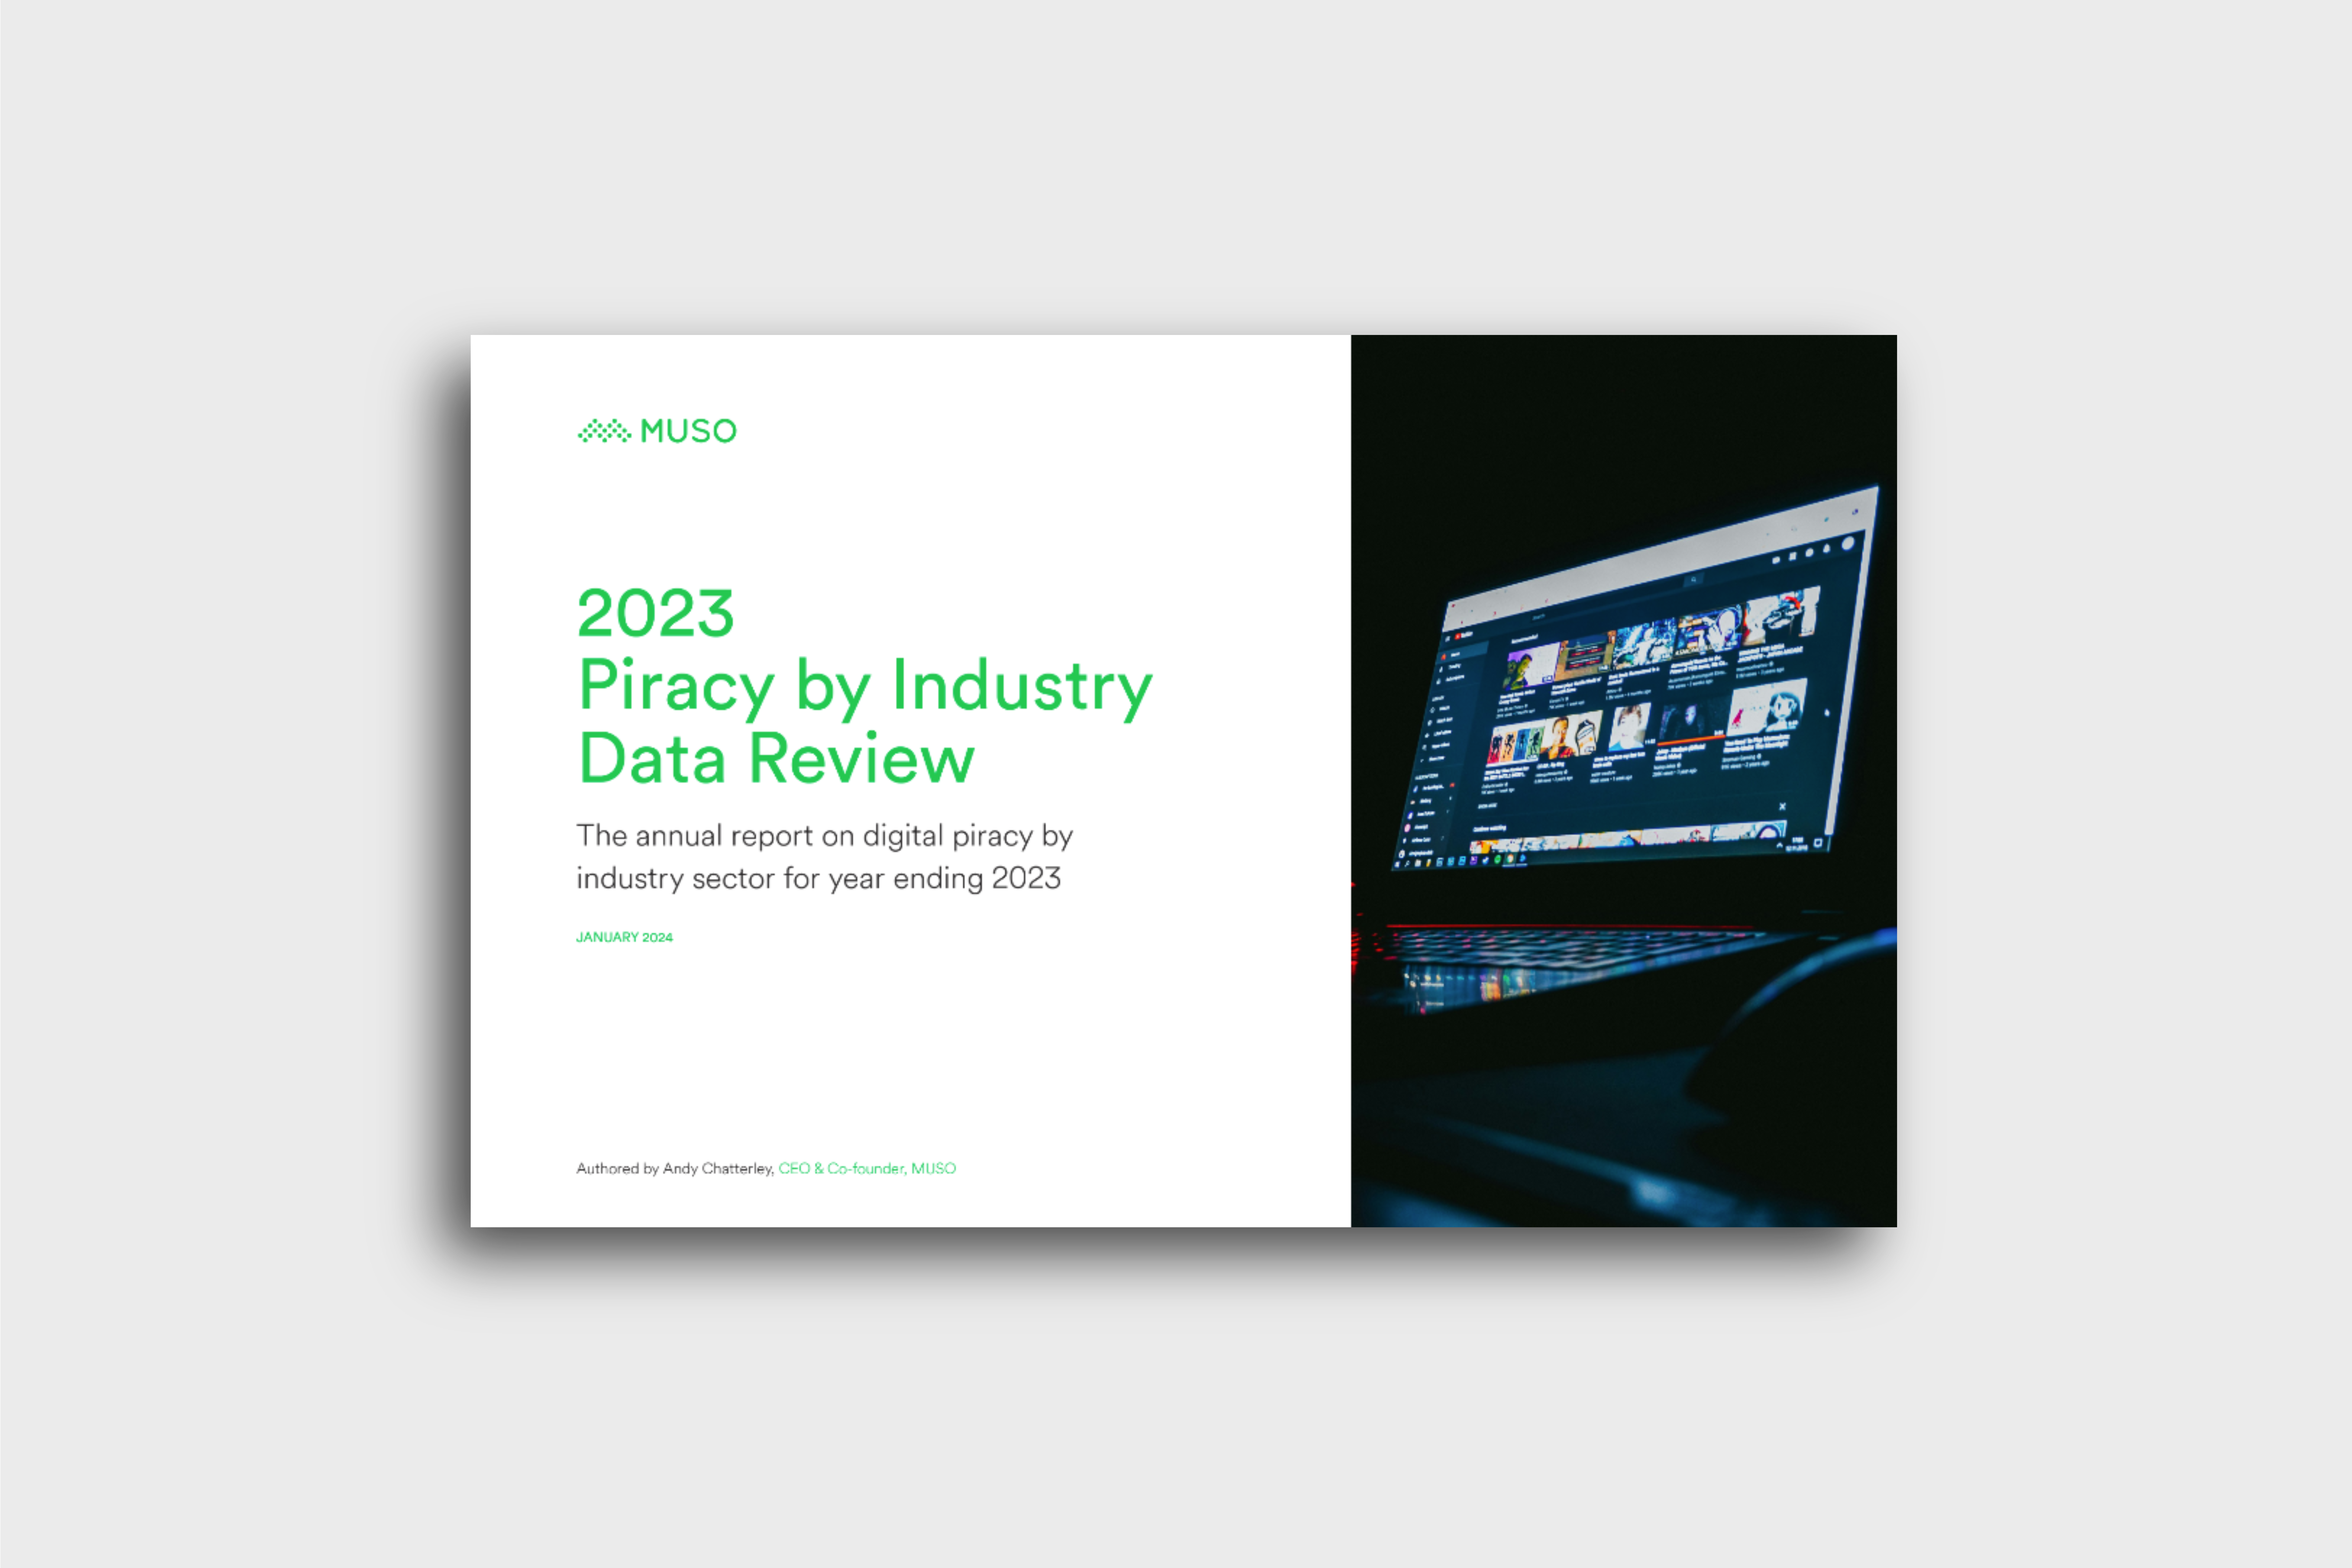 NEW: Global Piracy By Industry Report 2023